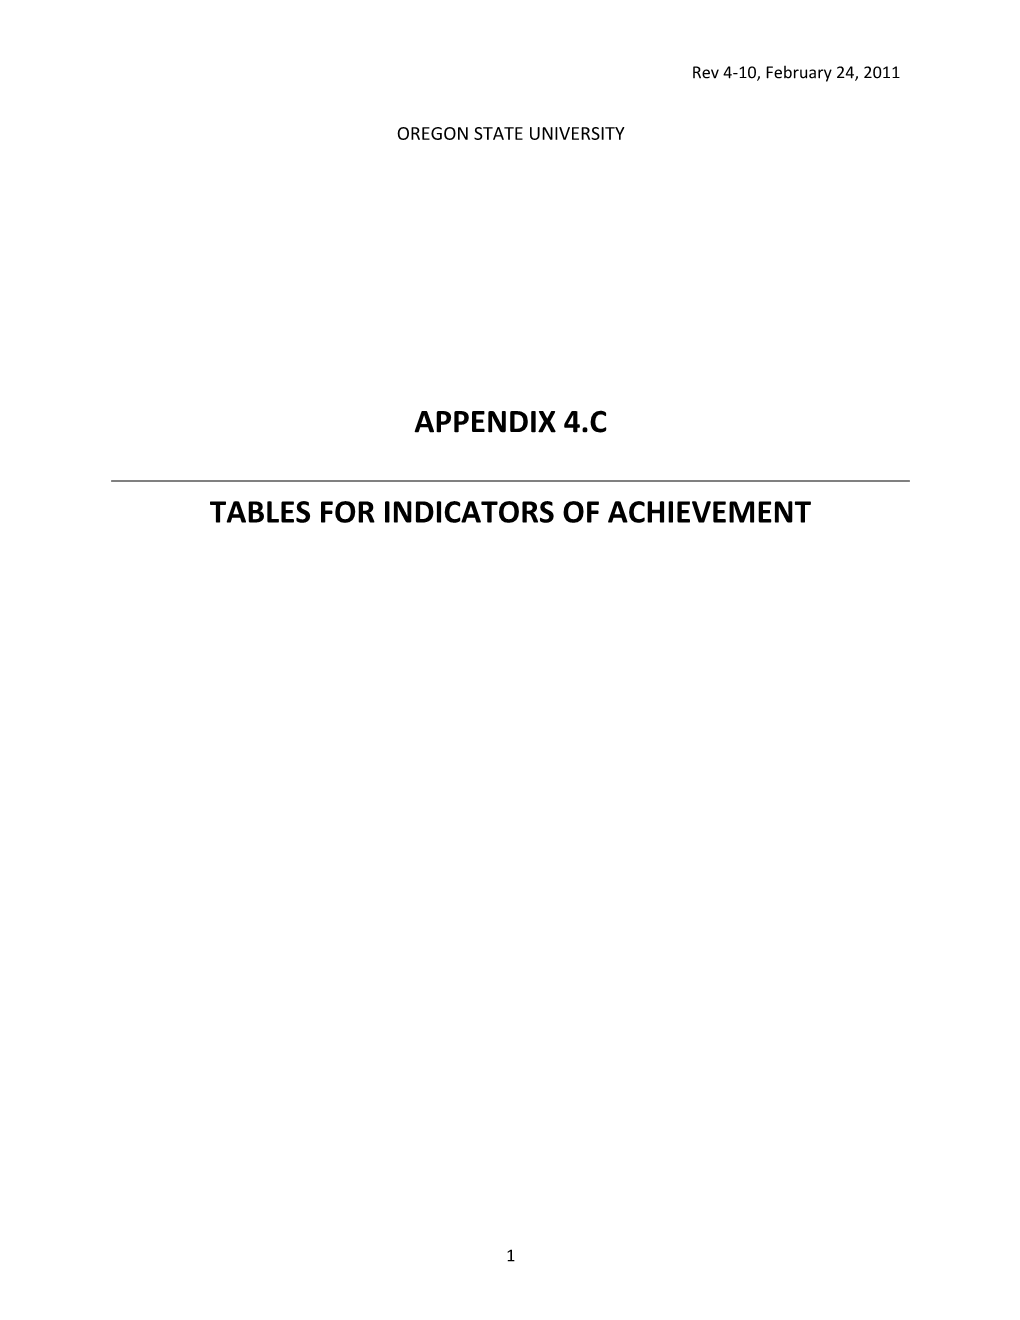 List of Tables for Indicators of Achievement